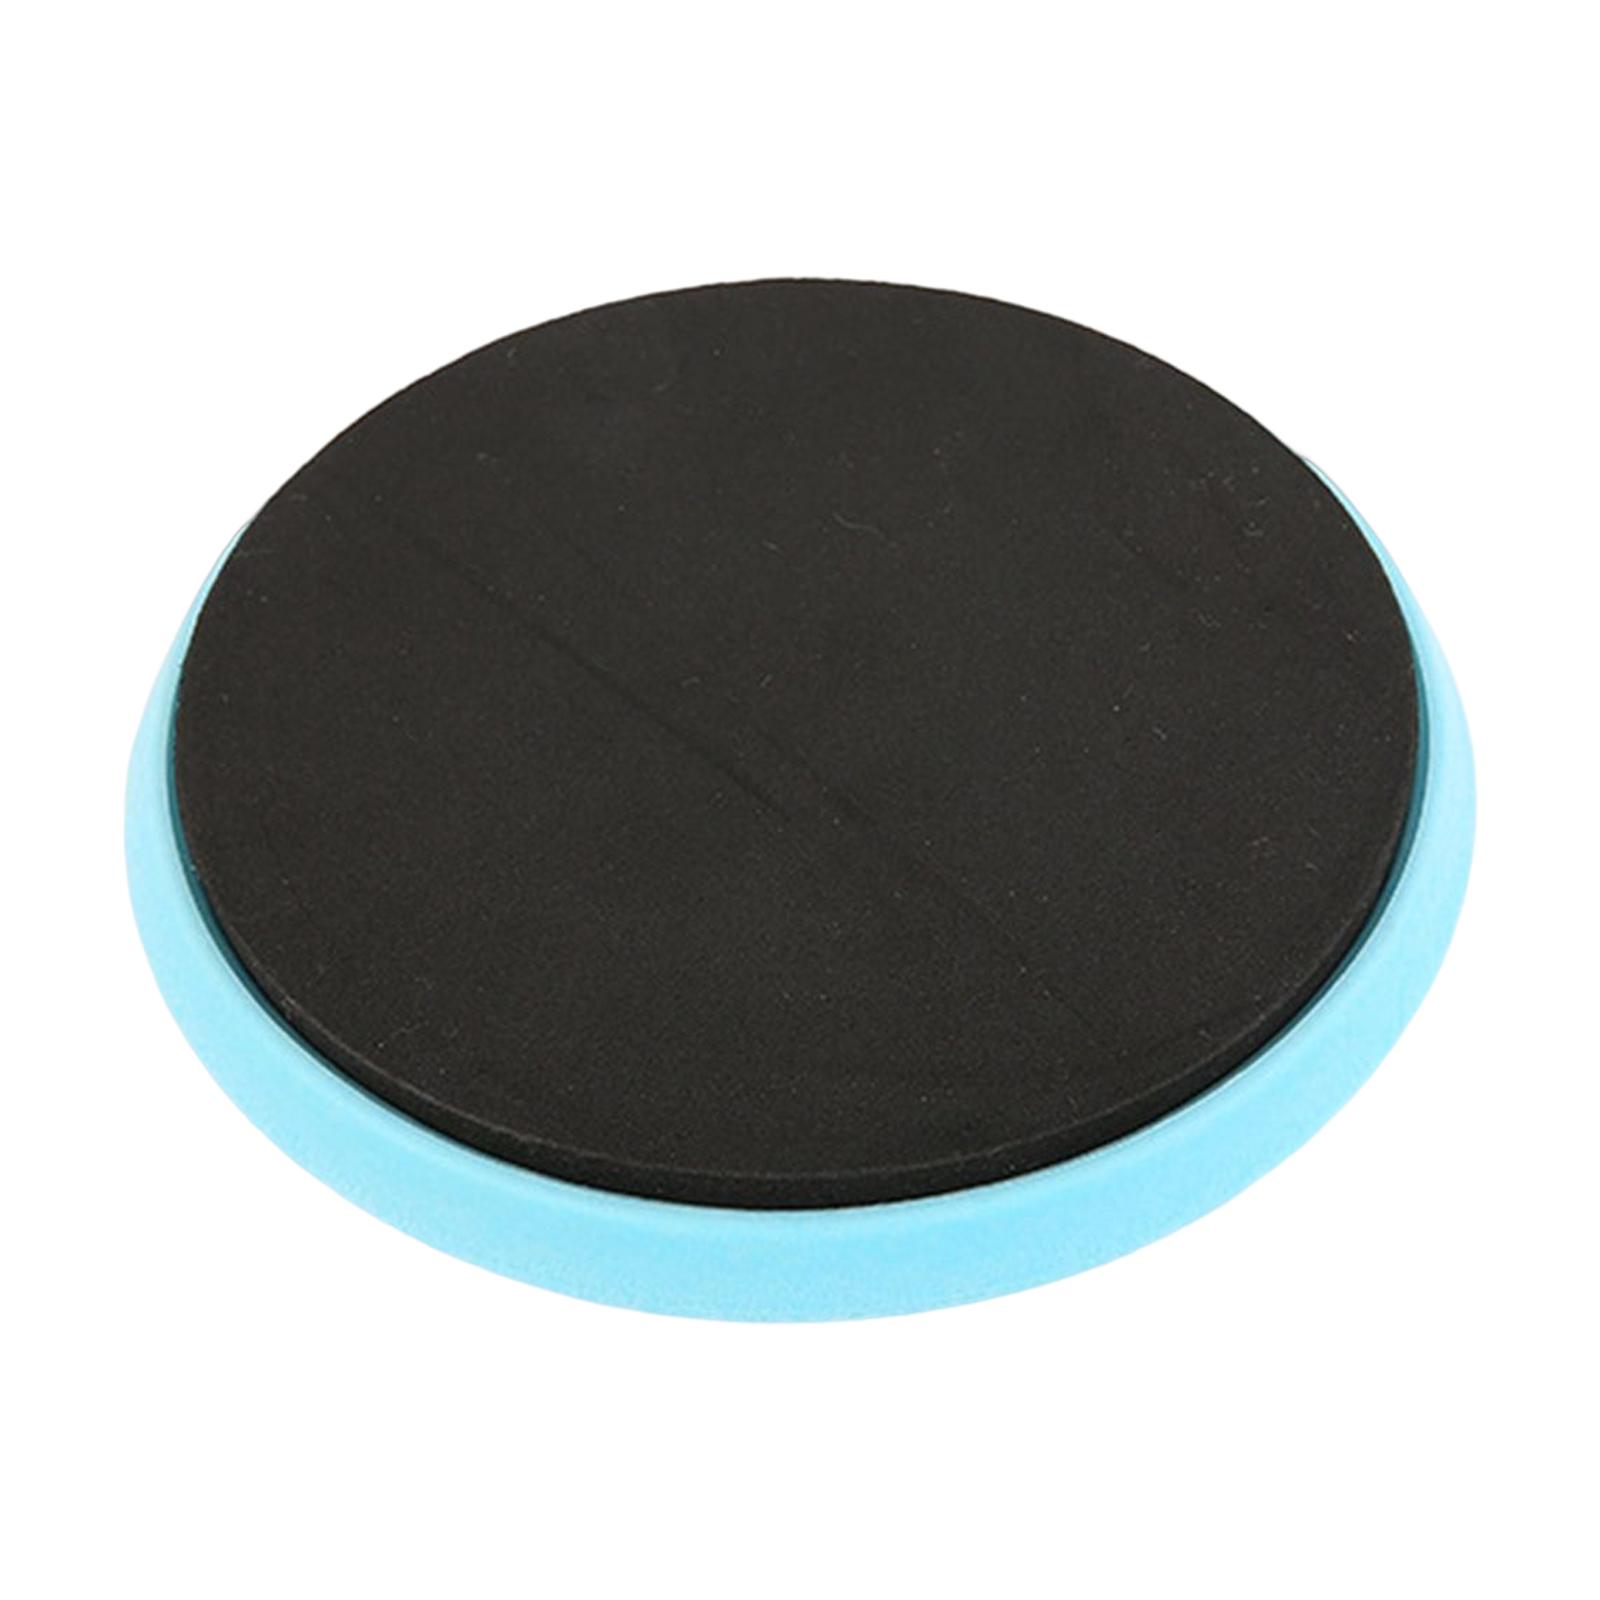 Round Ballet Turning Board Balance Portable Practice for Pirouette Dancers blue